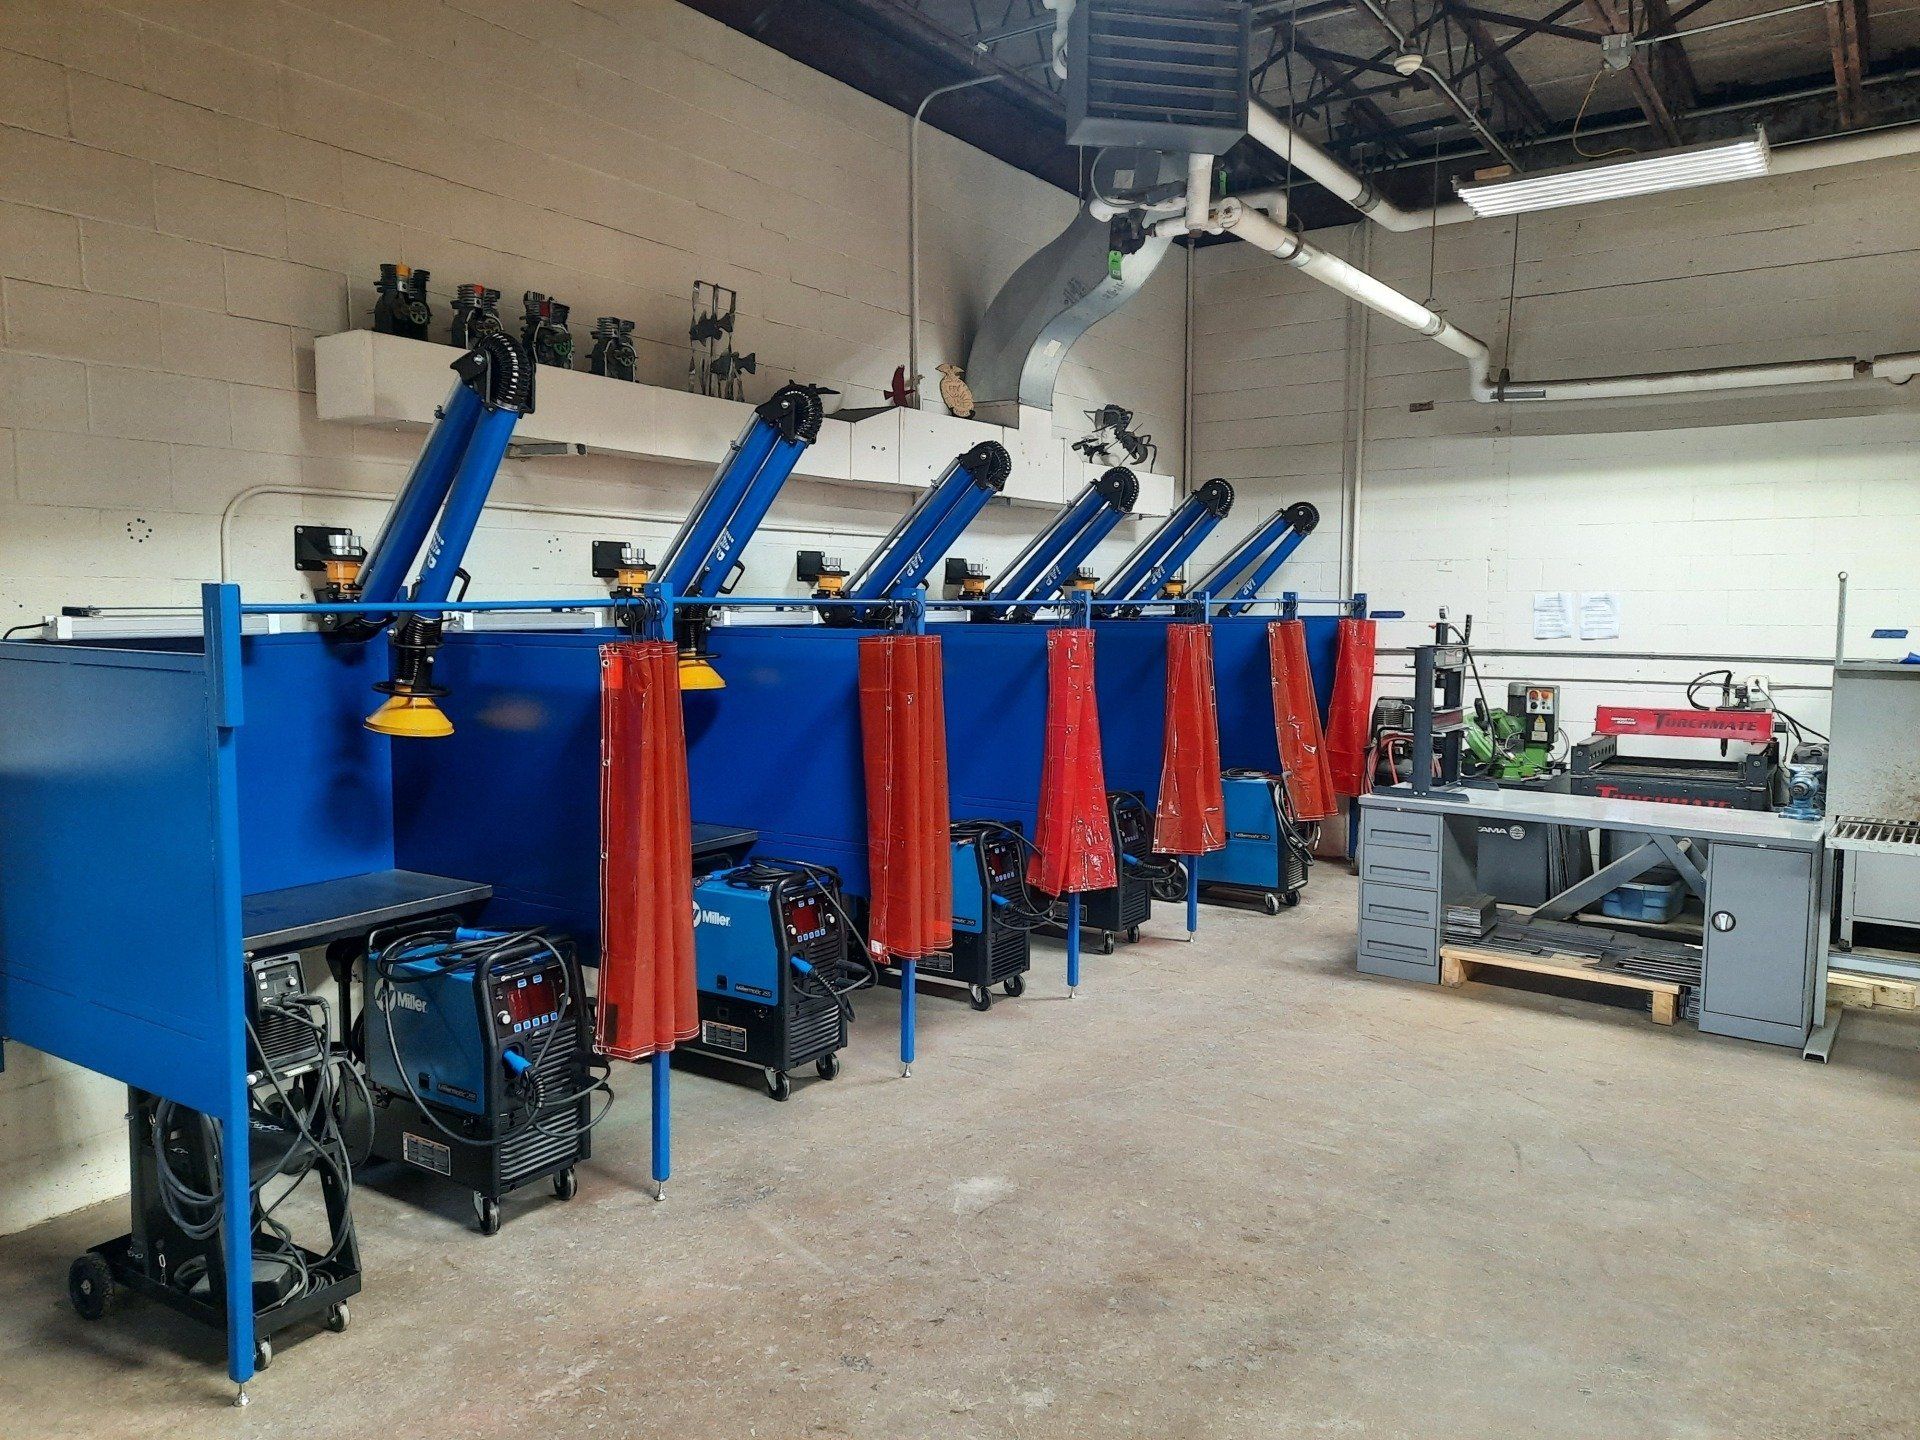 IAP Welding Booths with fume arms